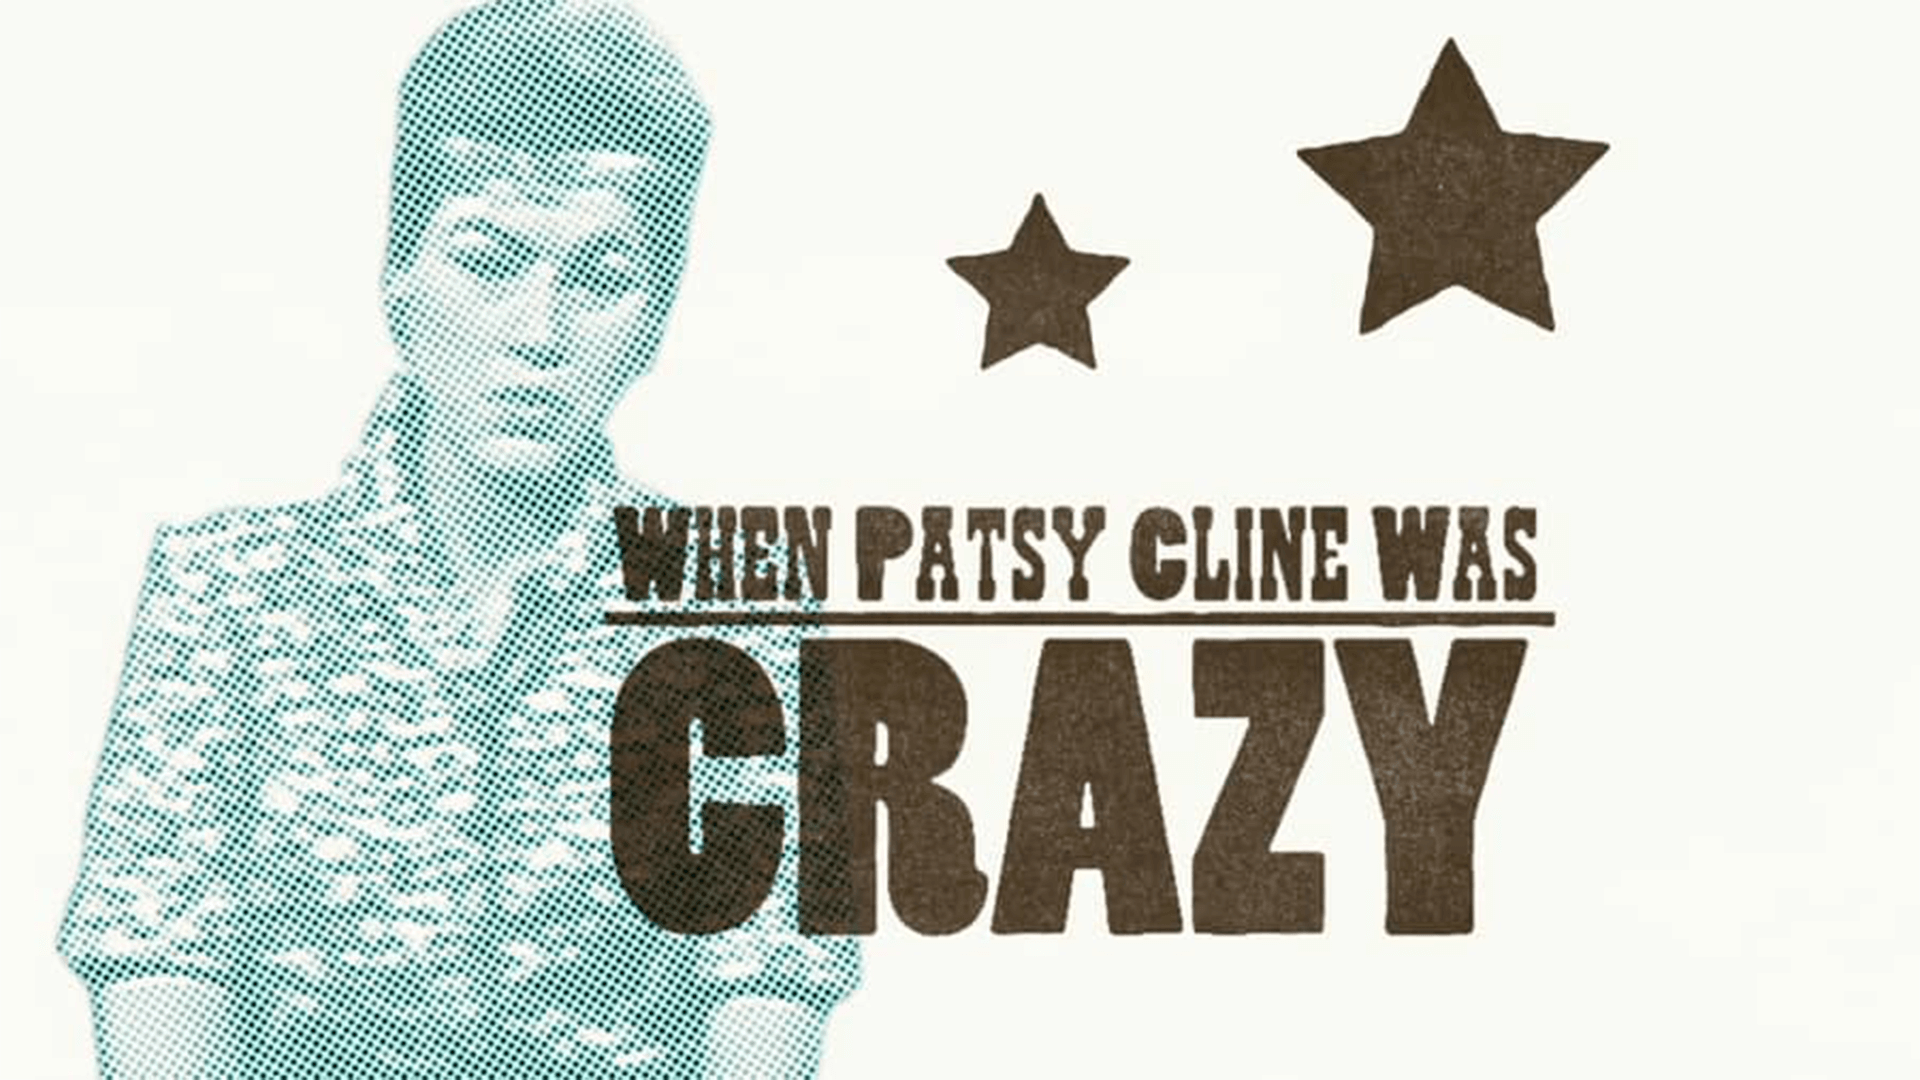 When Patsy Cline Was Crazy